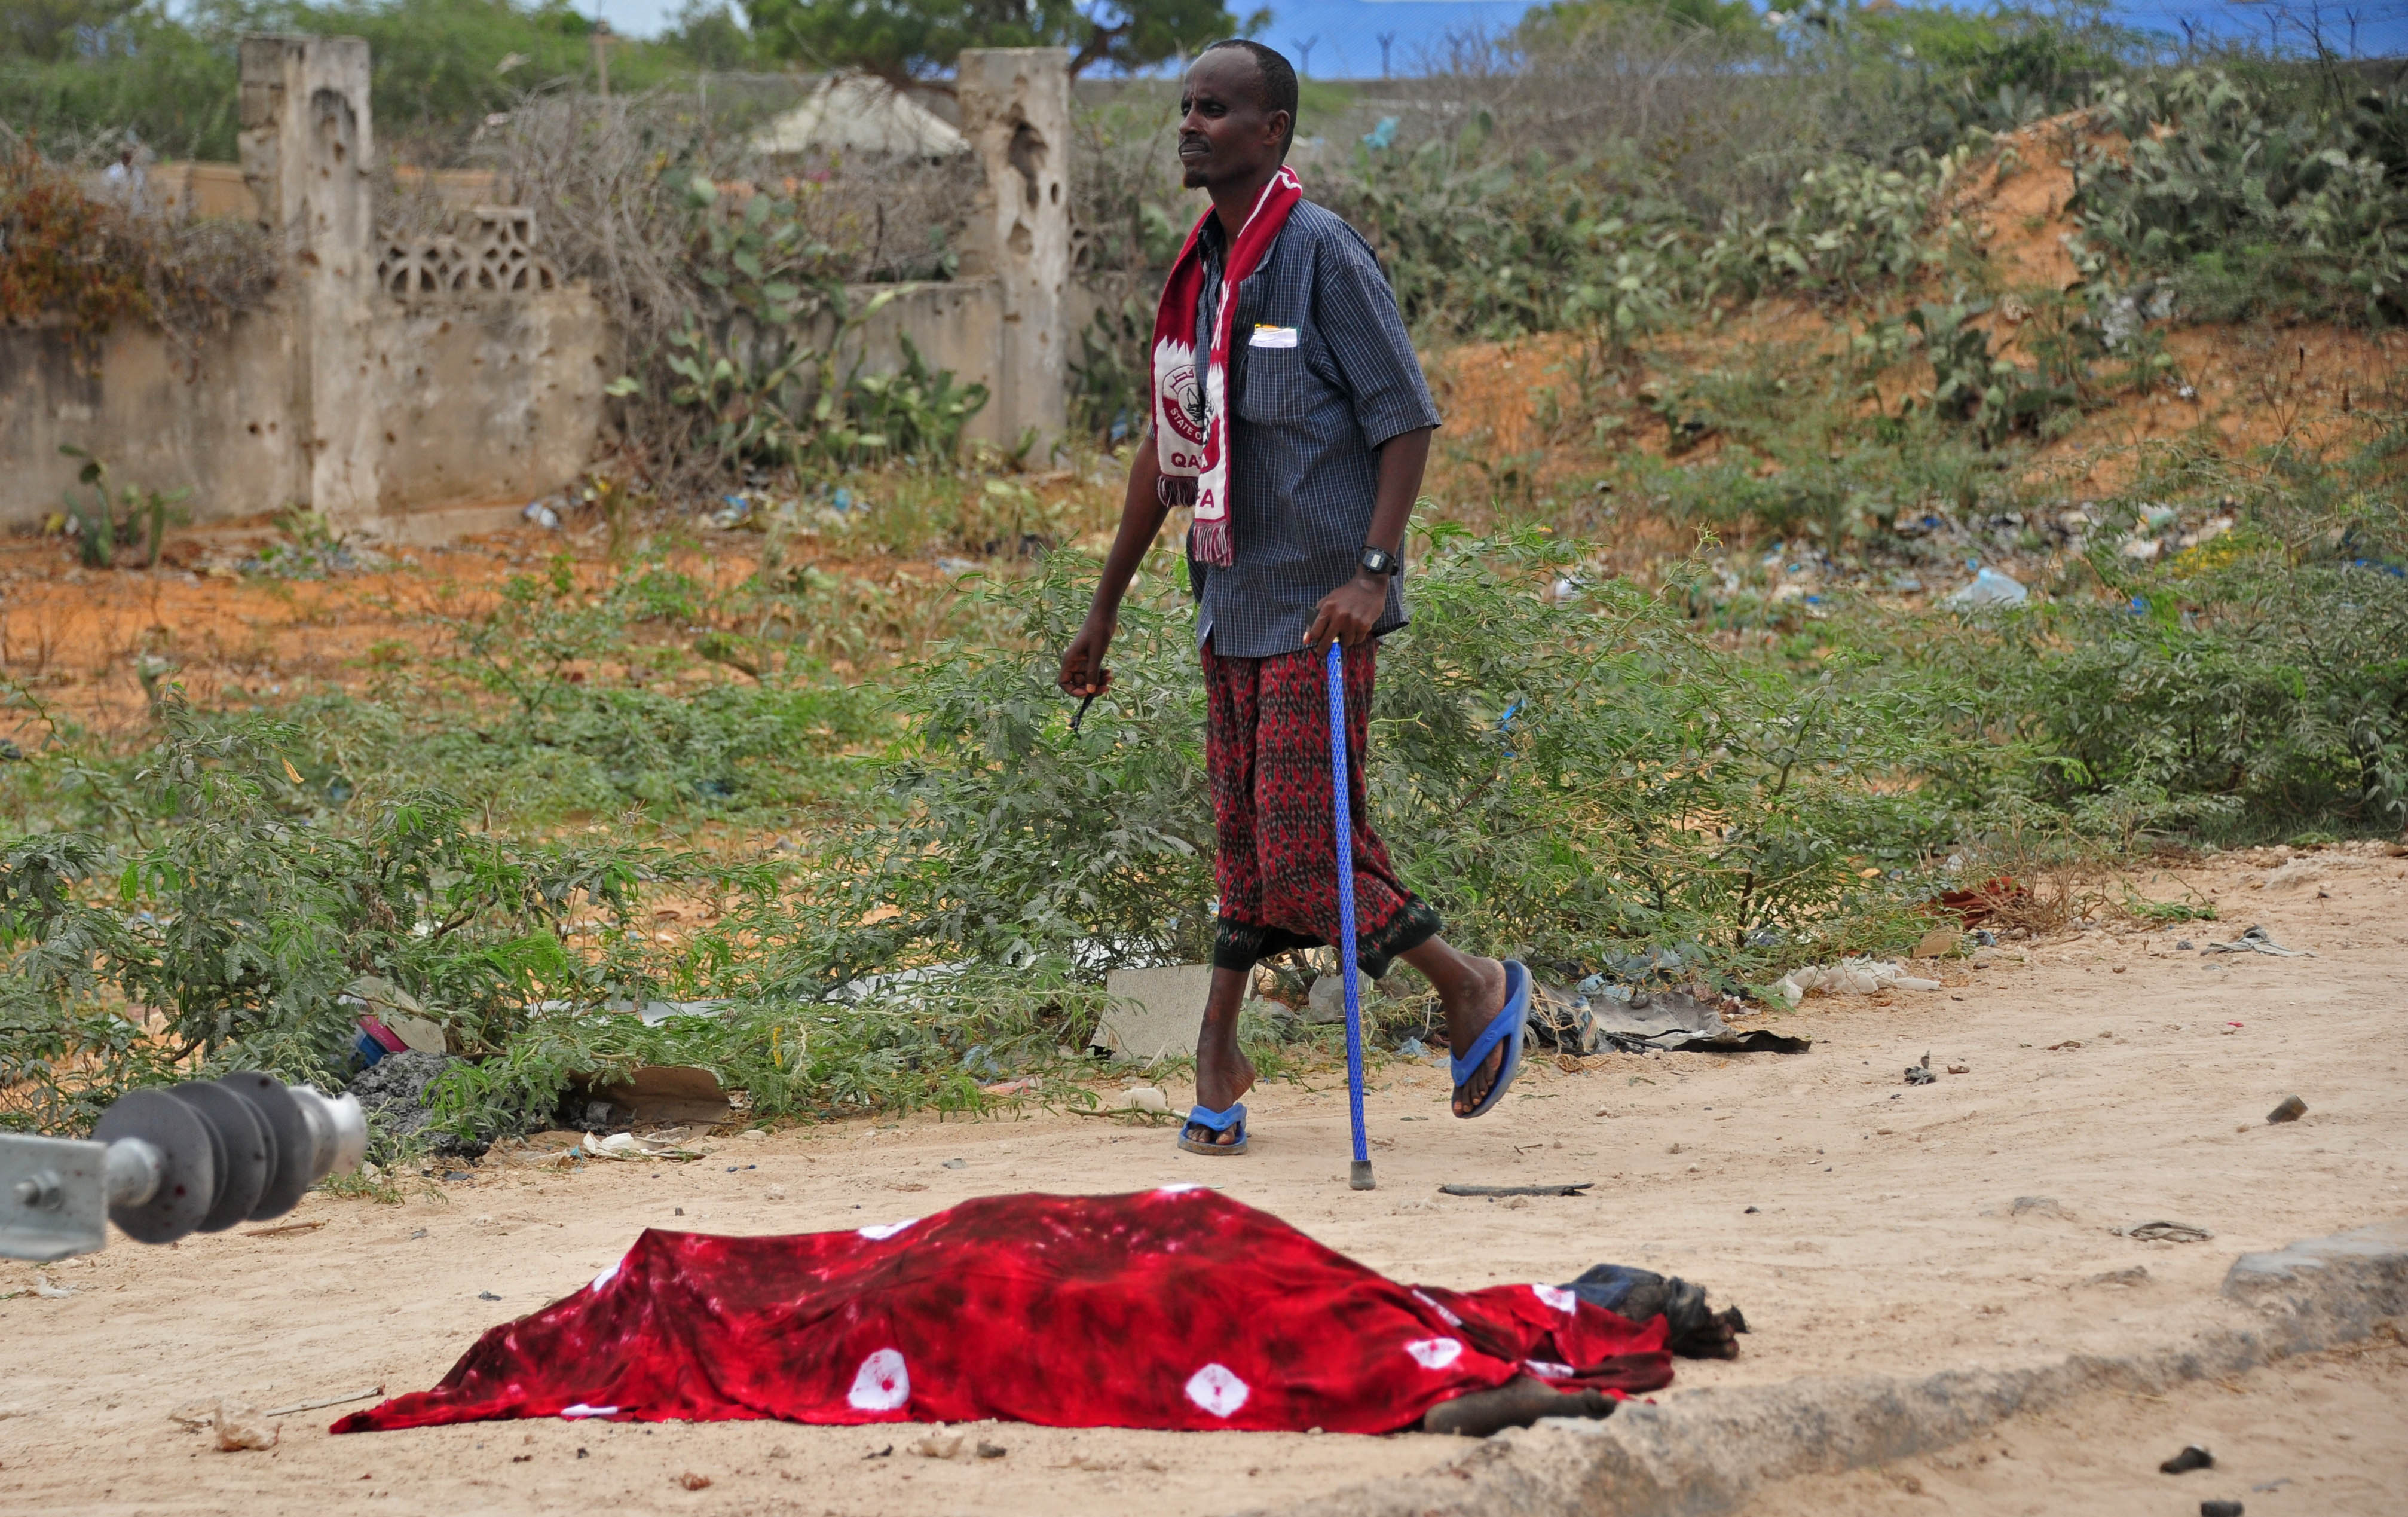 A man walks past a covered dead body after a suicide car attack near the Defense Ministry in Mogadishu on April 9, 2017. A car bomb attack targeting Somalia's new army chief on April 9, 2017, killed at least five people, including four civilians and a soldier, said an AFP reporter at the scene. The Mogadishu attack against the army convoy was claimed by the Shabaab extremist group and came only days after Mohamed Jama Irfid, who was not hurt, was appointed to head the country's army, a security source said.  / AFP PHOTO / Mohamed ABDIWAHAB